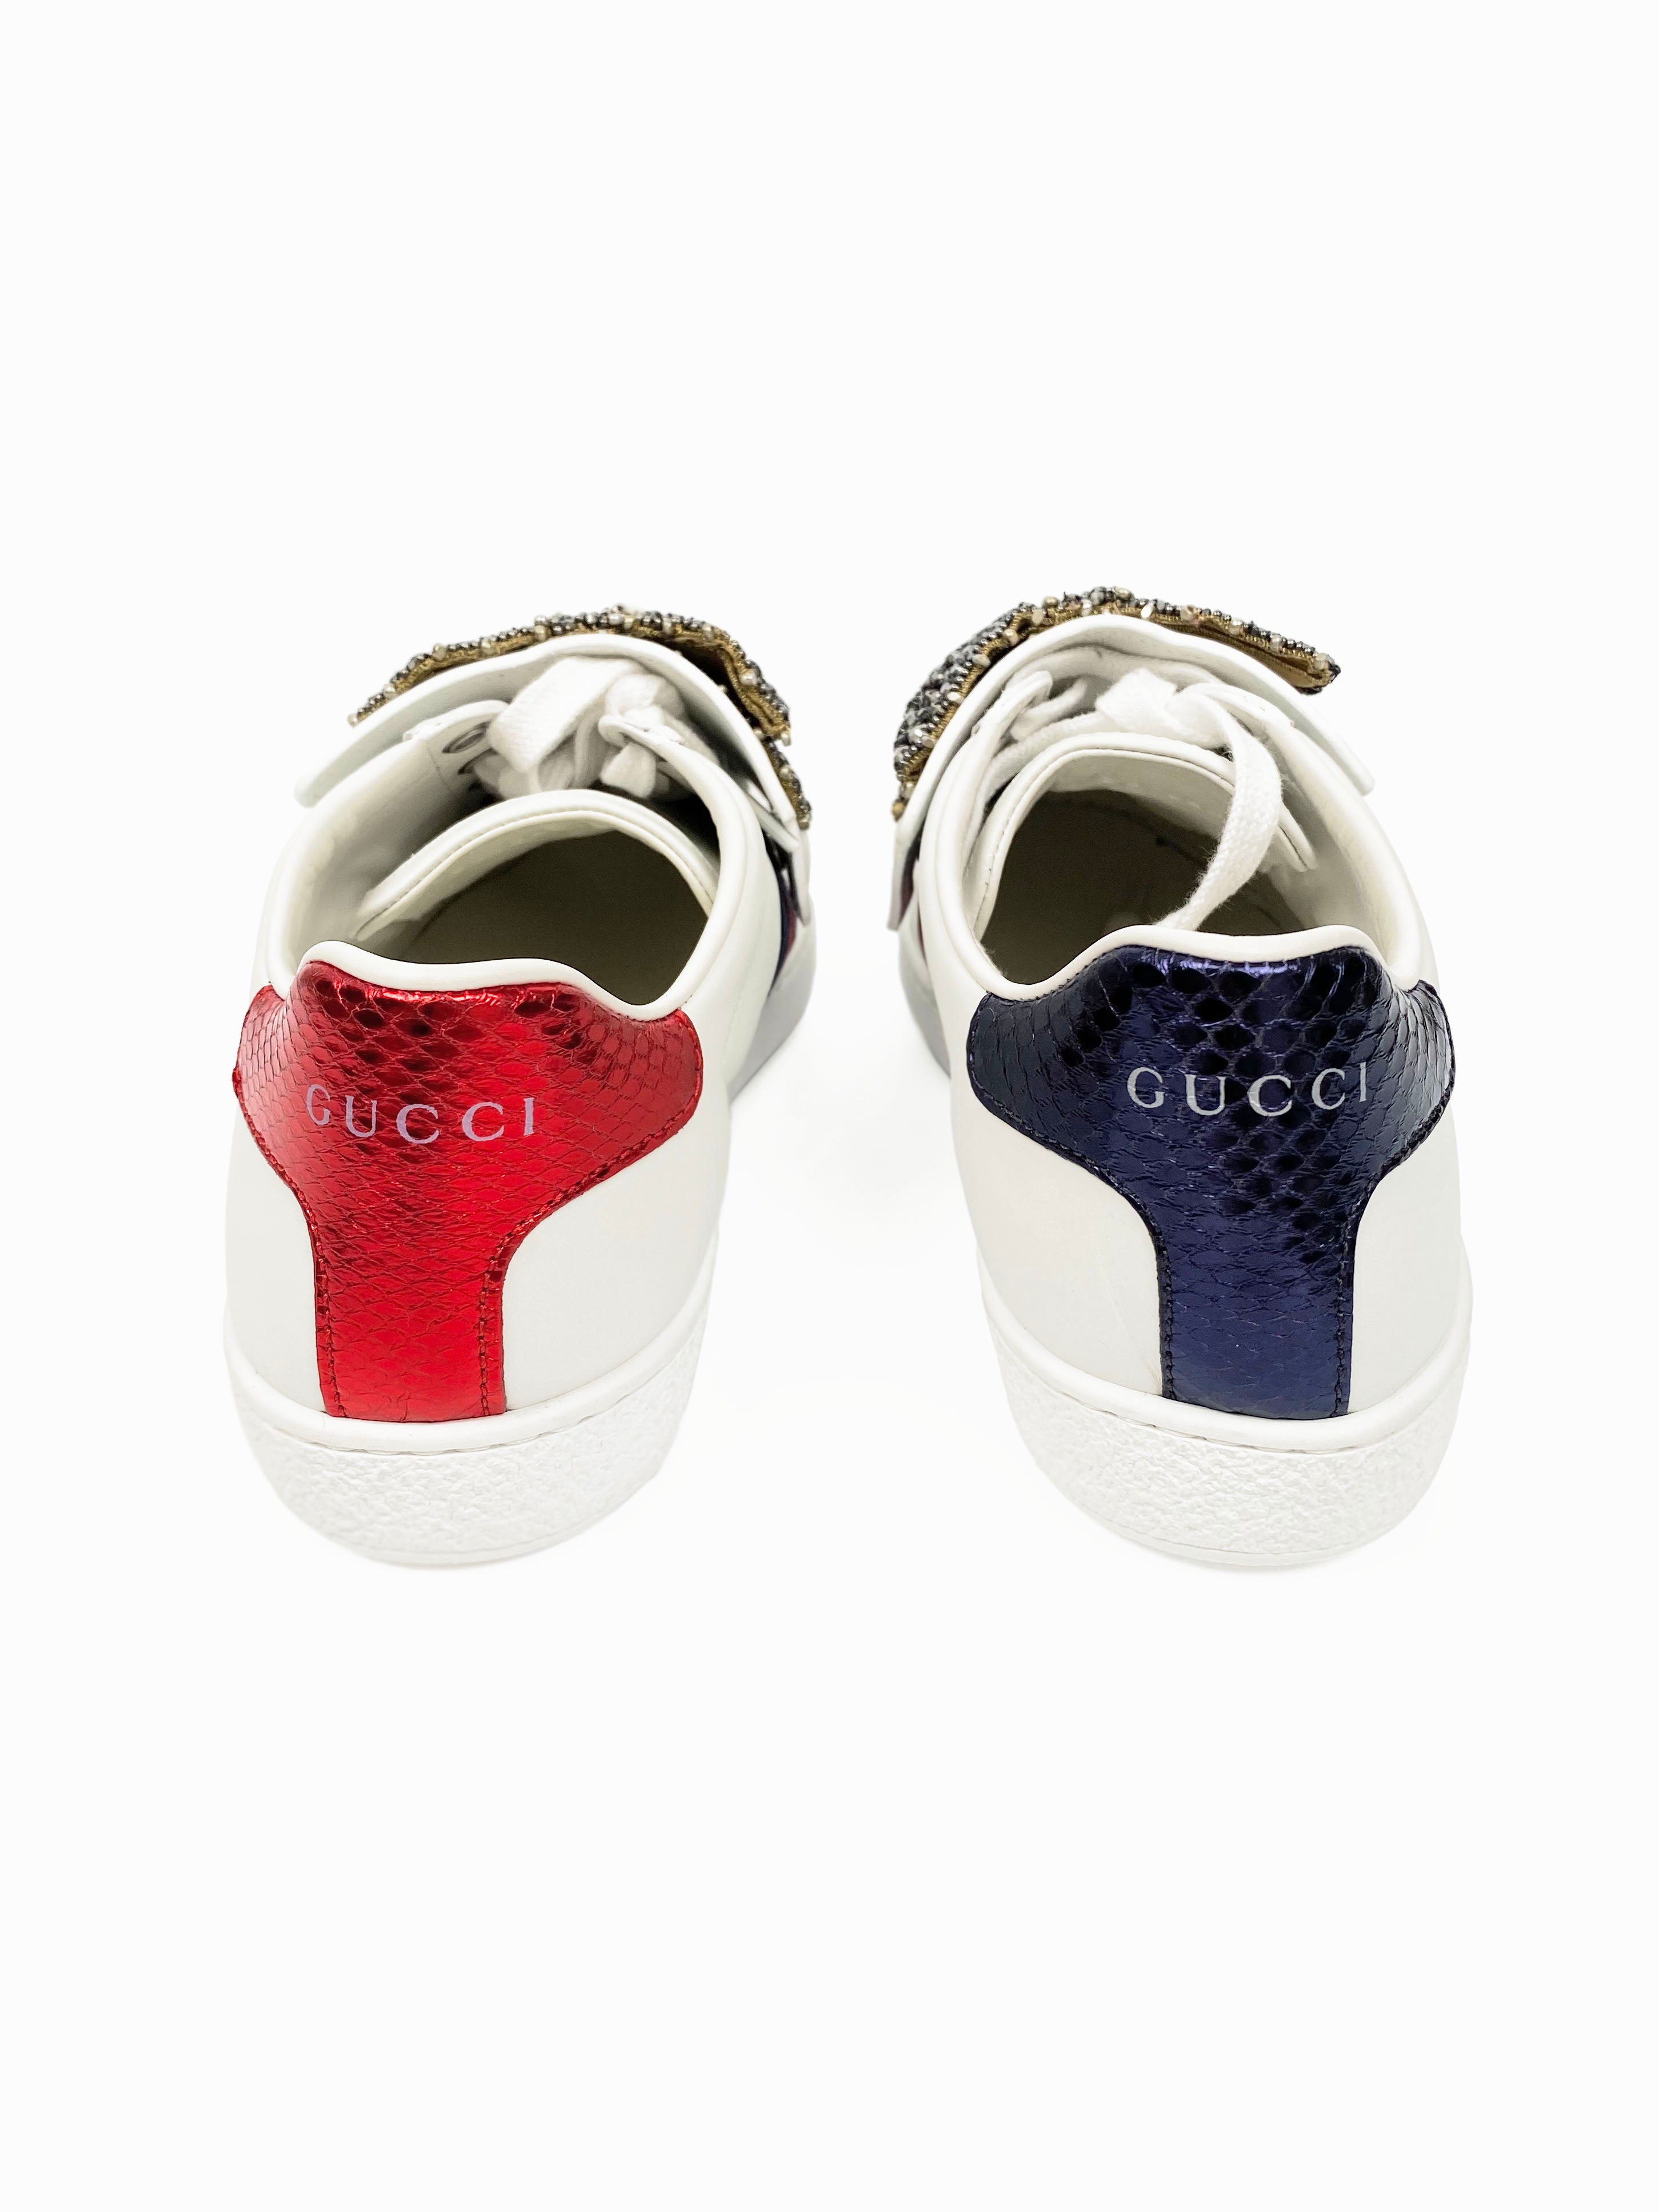 Gucci Ace Bow Lace Patch Sneakers 35.5